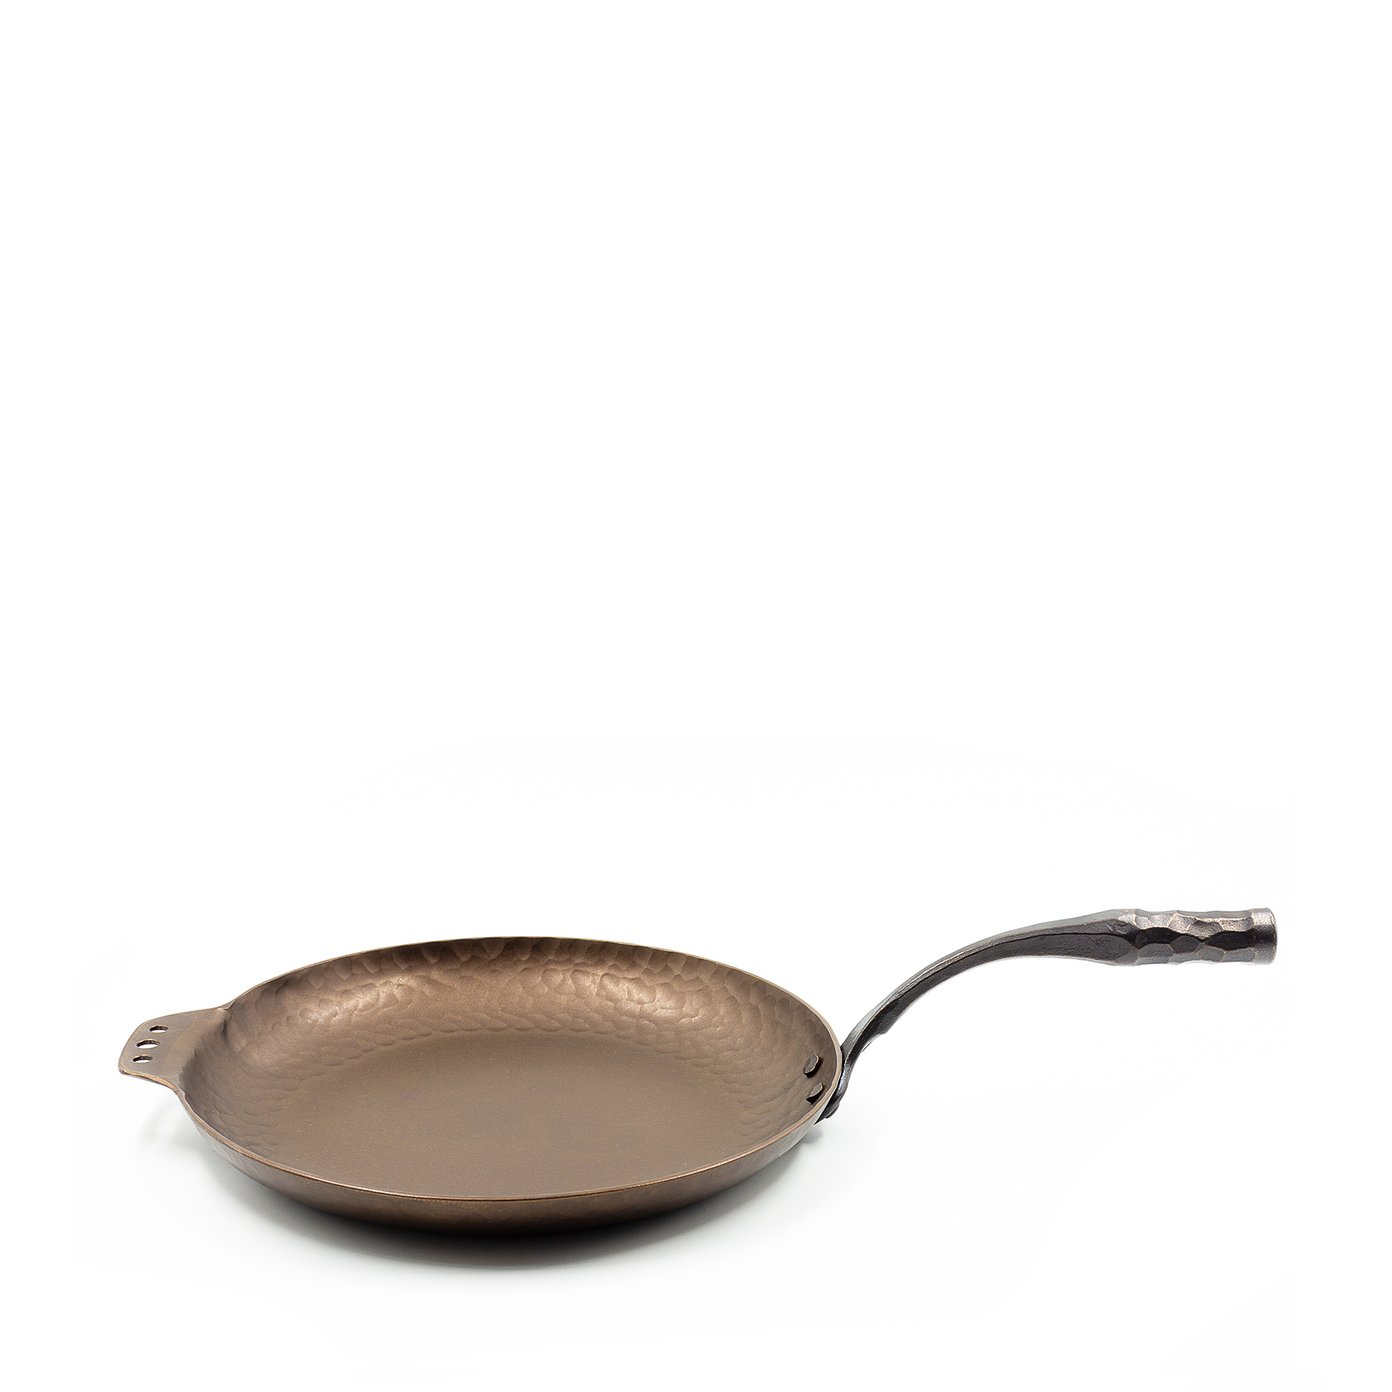 Smithey Farmhouse Skillet, Hand-Forged Carbon Steel, 12 Frying Pan